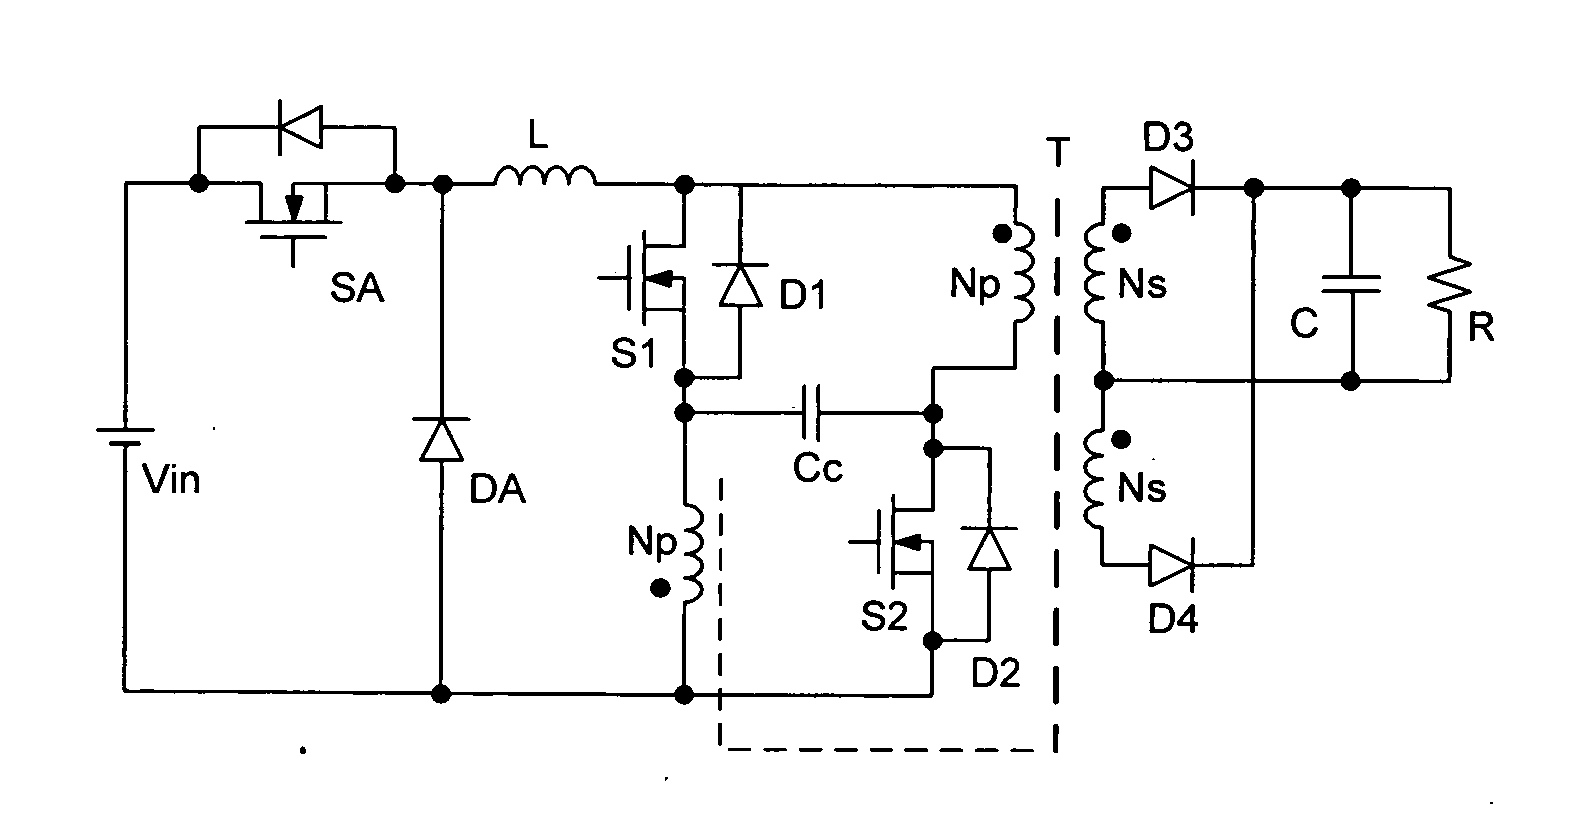 Isolated current regulated DC-DC converter